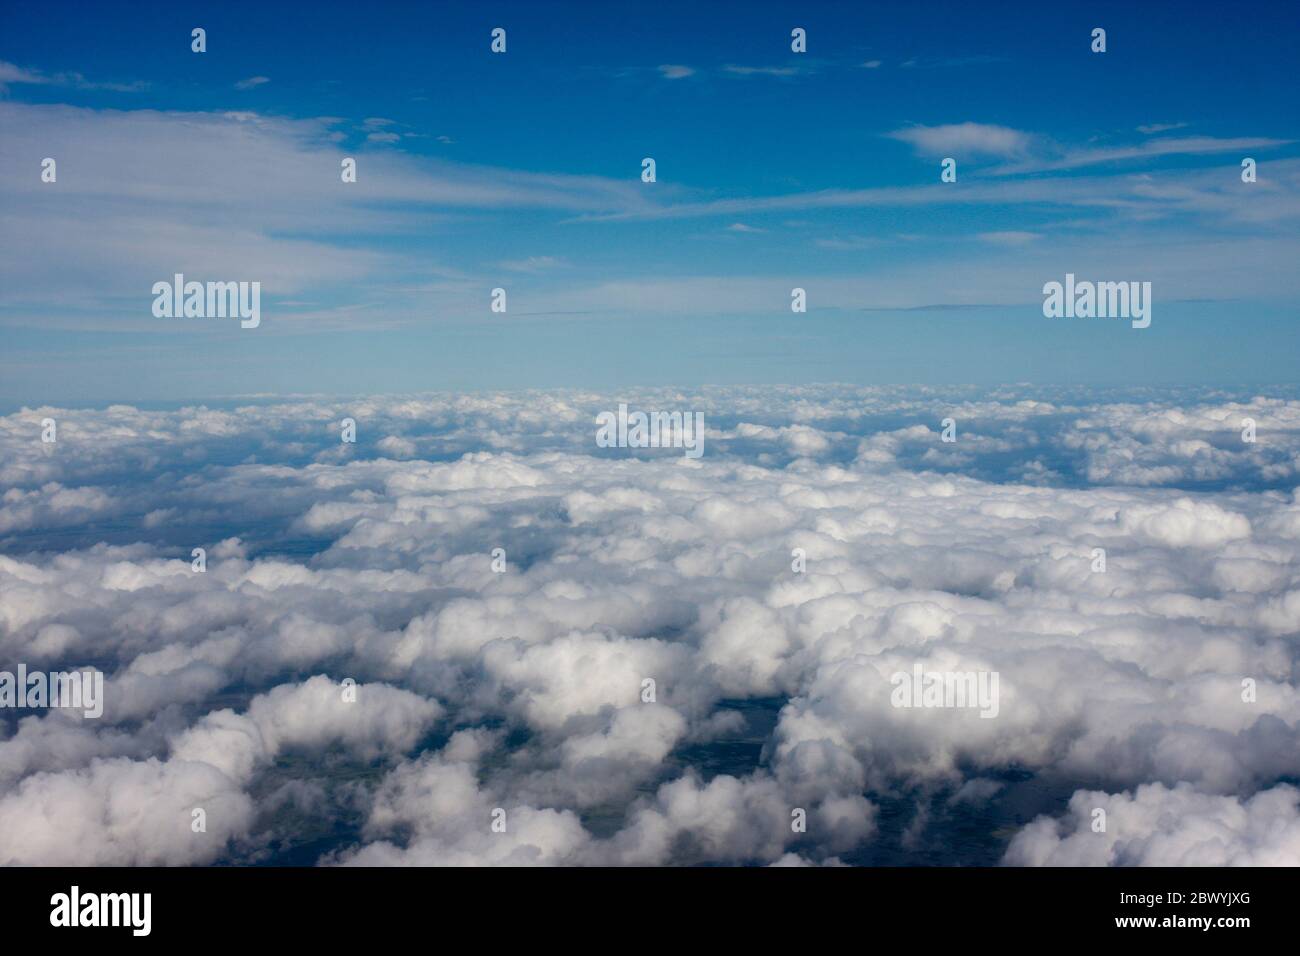 Cloudy sky over Bangladesh, view from airplane window. Stock Photo